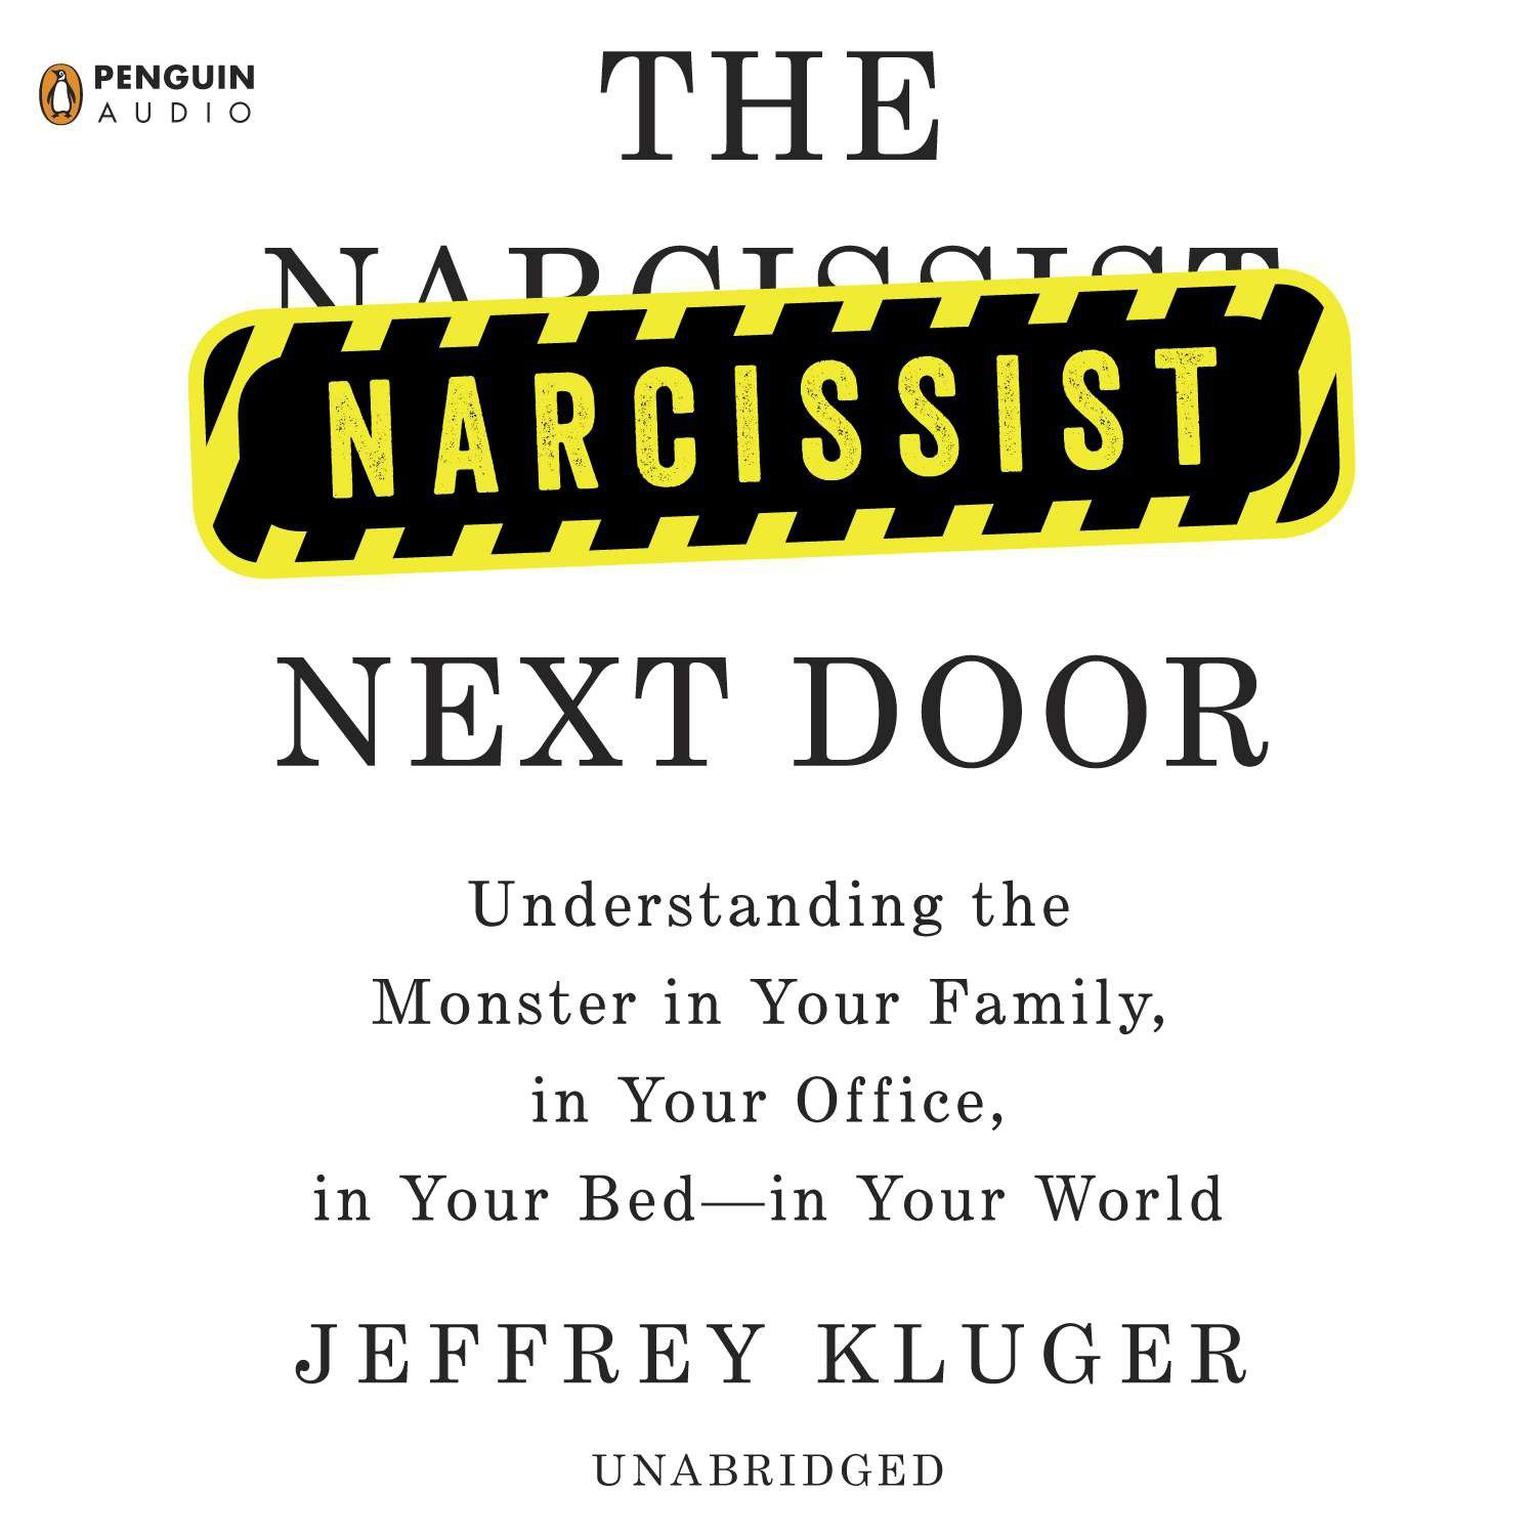 The Narcissist Next Door: Understanding the Monster in Your Family, in Your Office, in Your Bed-in Your World Audiobook, by Jeffrey Kluger